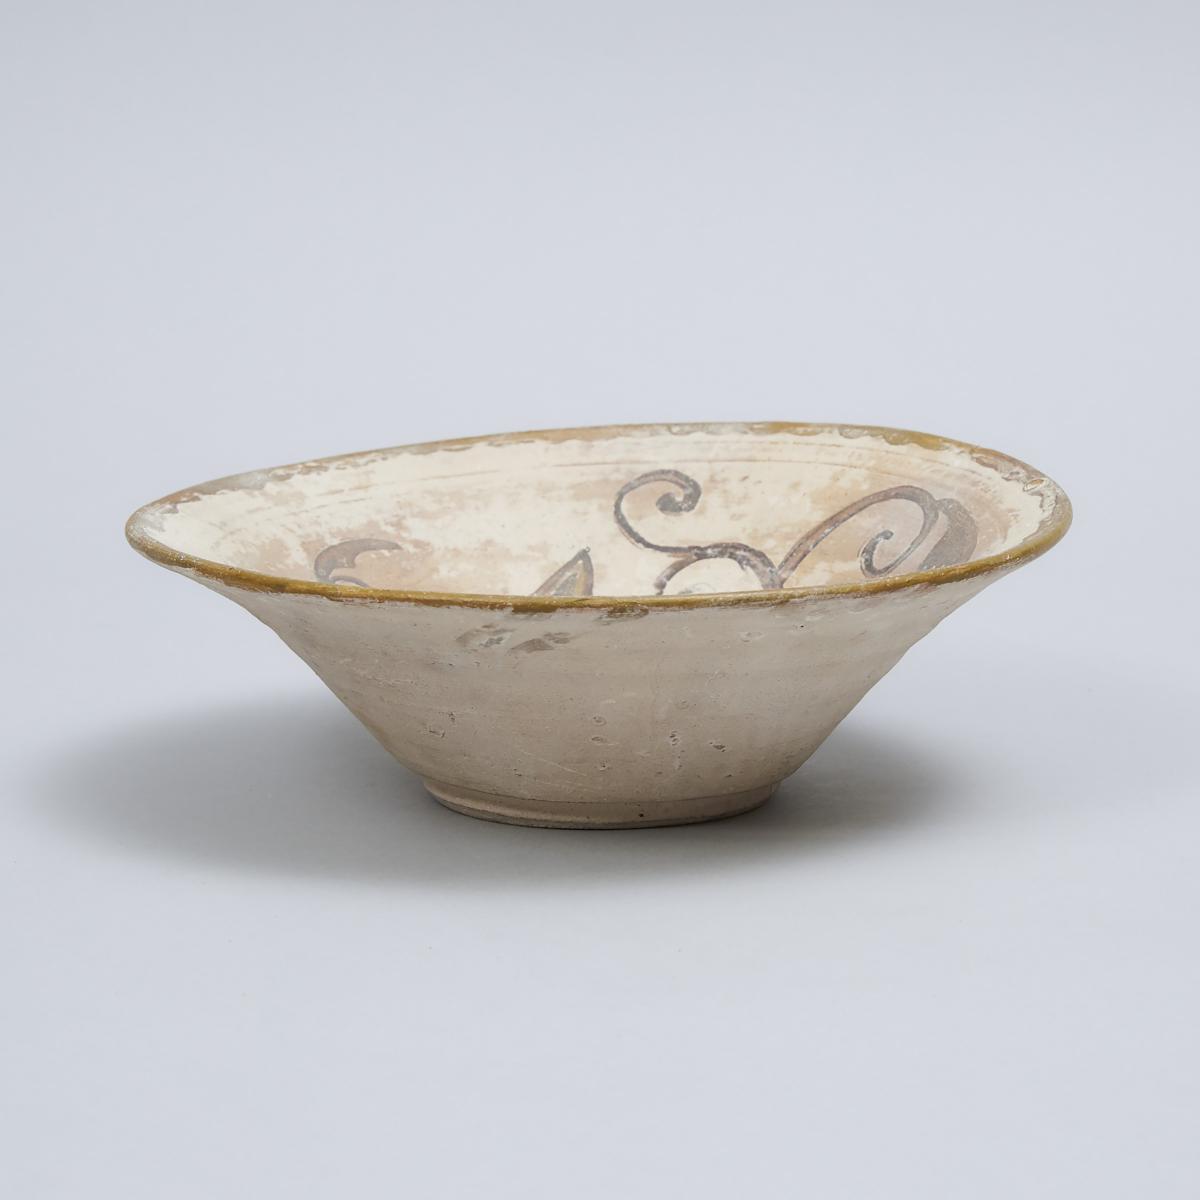 Fatimid Style Unglazed Pottery Bowl with Rabbit, 11th/12th century, height 2.6 in — 6.7 cm, diameter